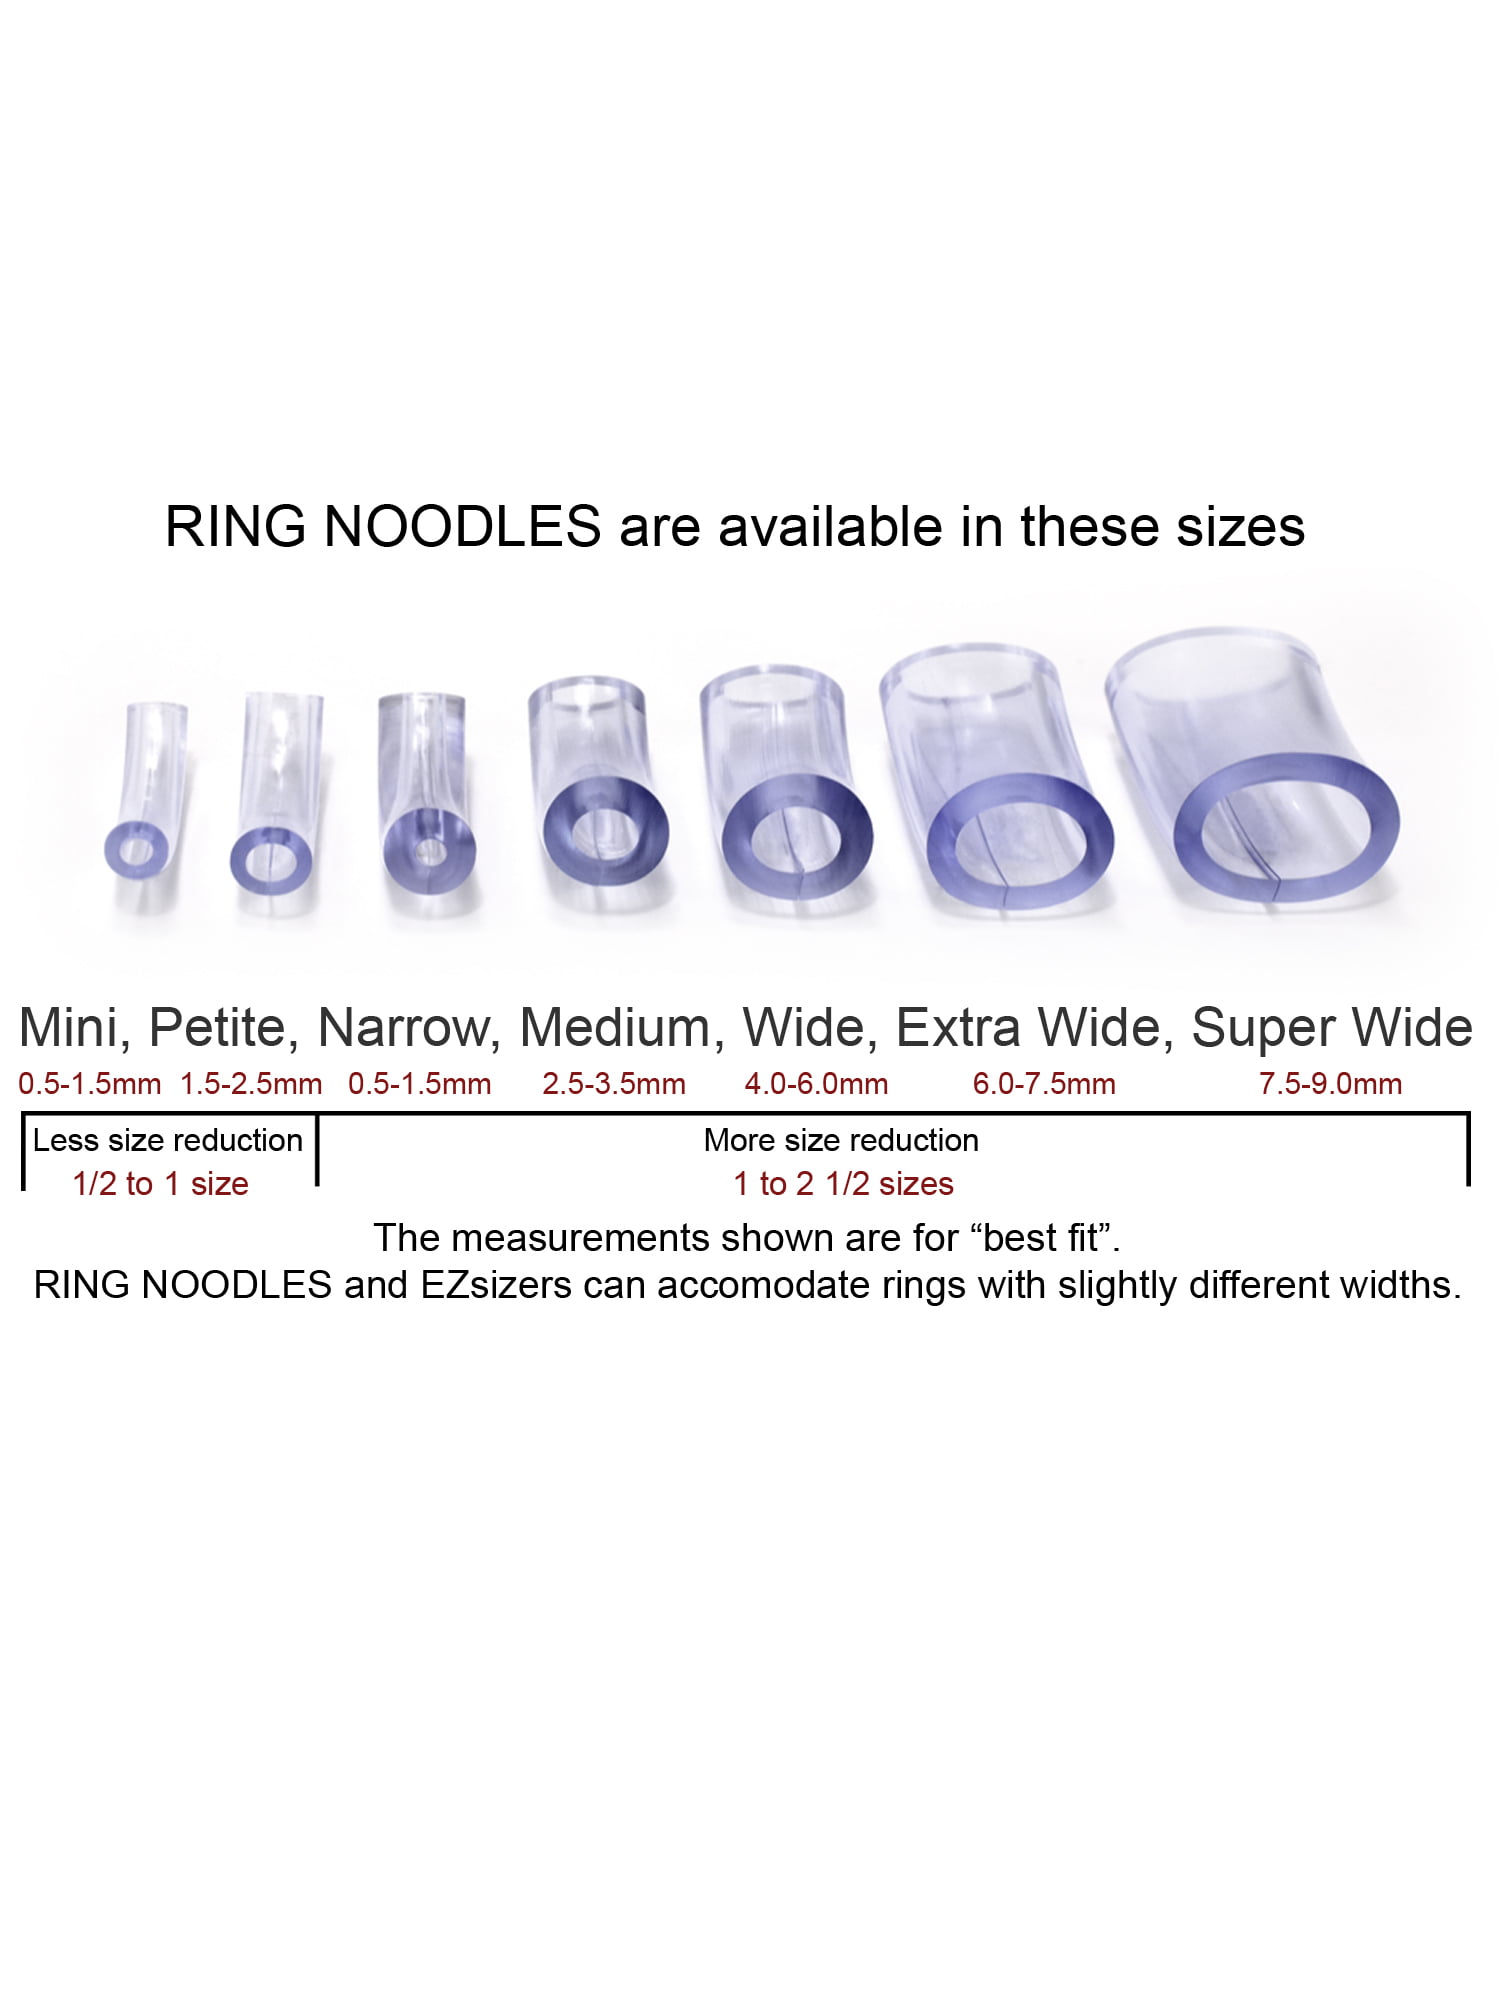 RING NOODLE: Ring Size Reducer Size: Mixed 1 wide 1 narrow 1 medium Ring Size Adjuster for rings 0.5 to 6.0 mm wide. Ring Guard 